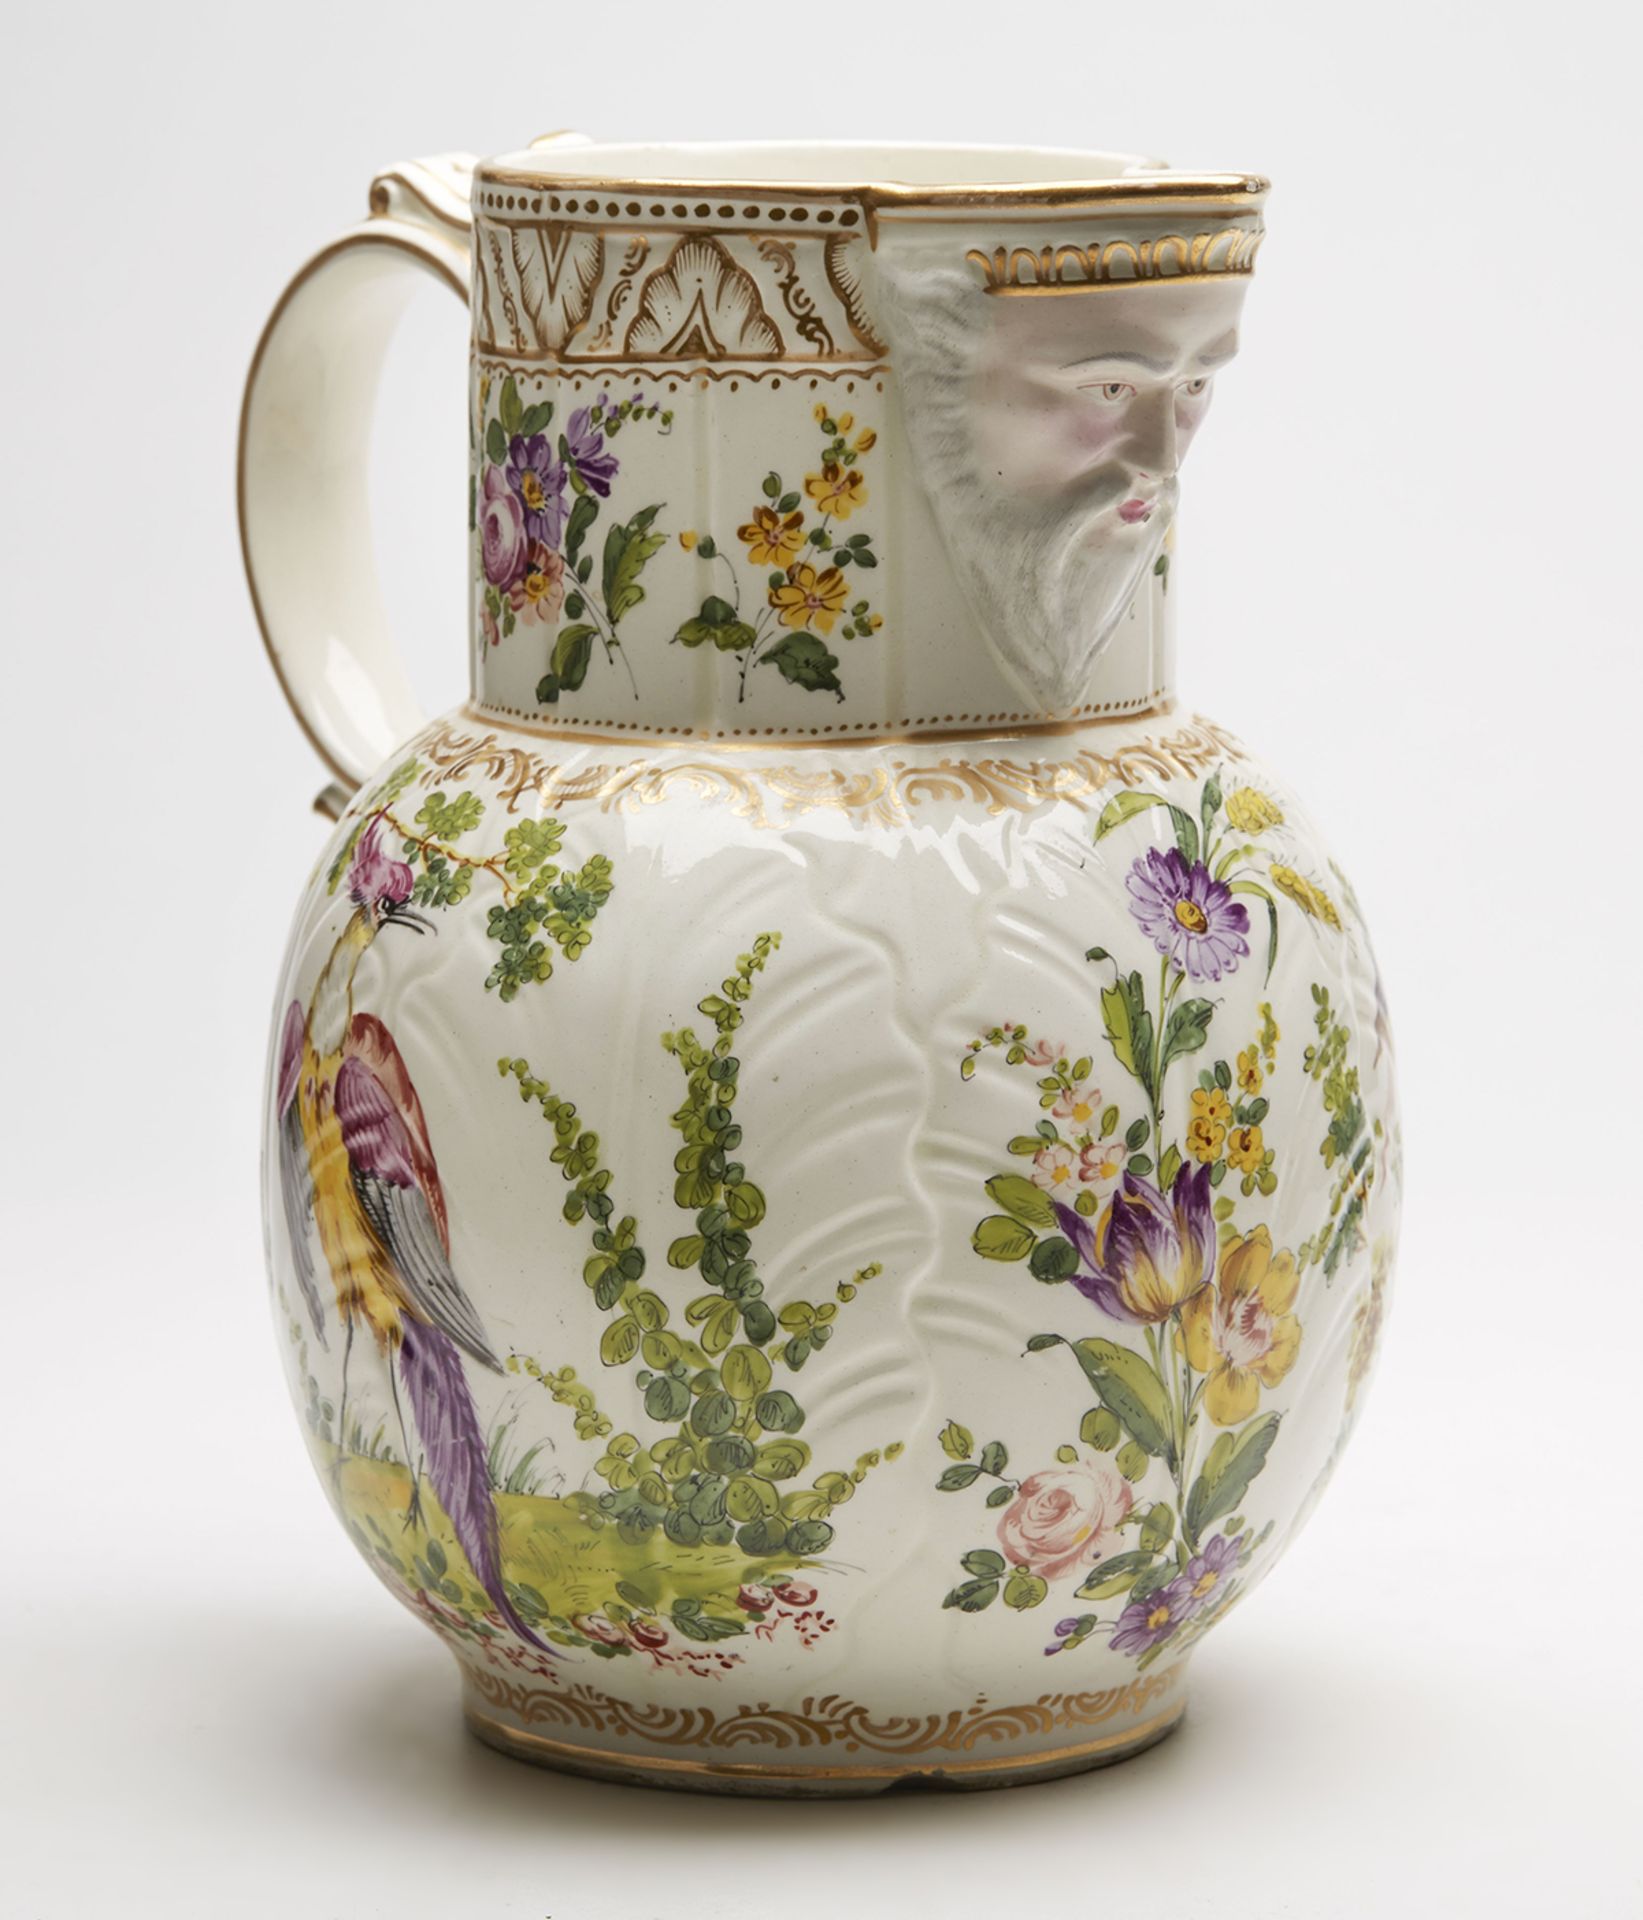 ANTIQUE CABBAGE LEAF MASK JUG WITH EXOTIC BIRDS 18/19TH C.